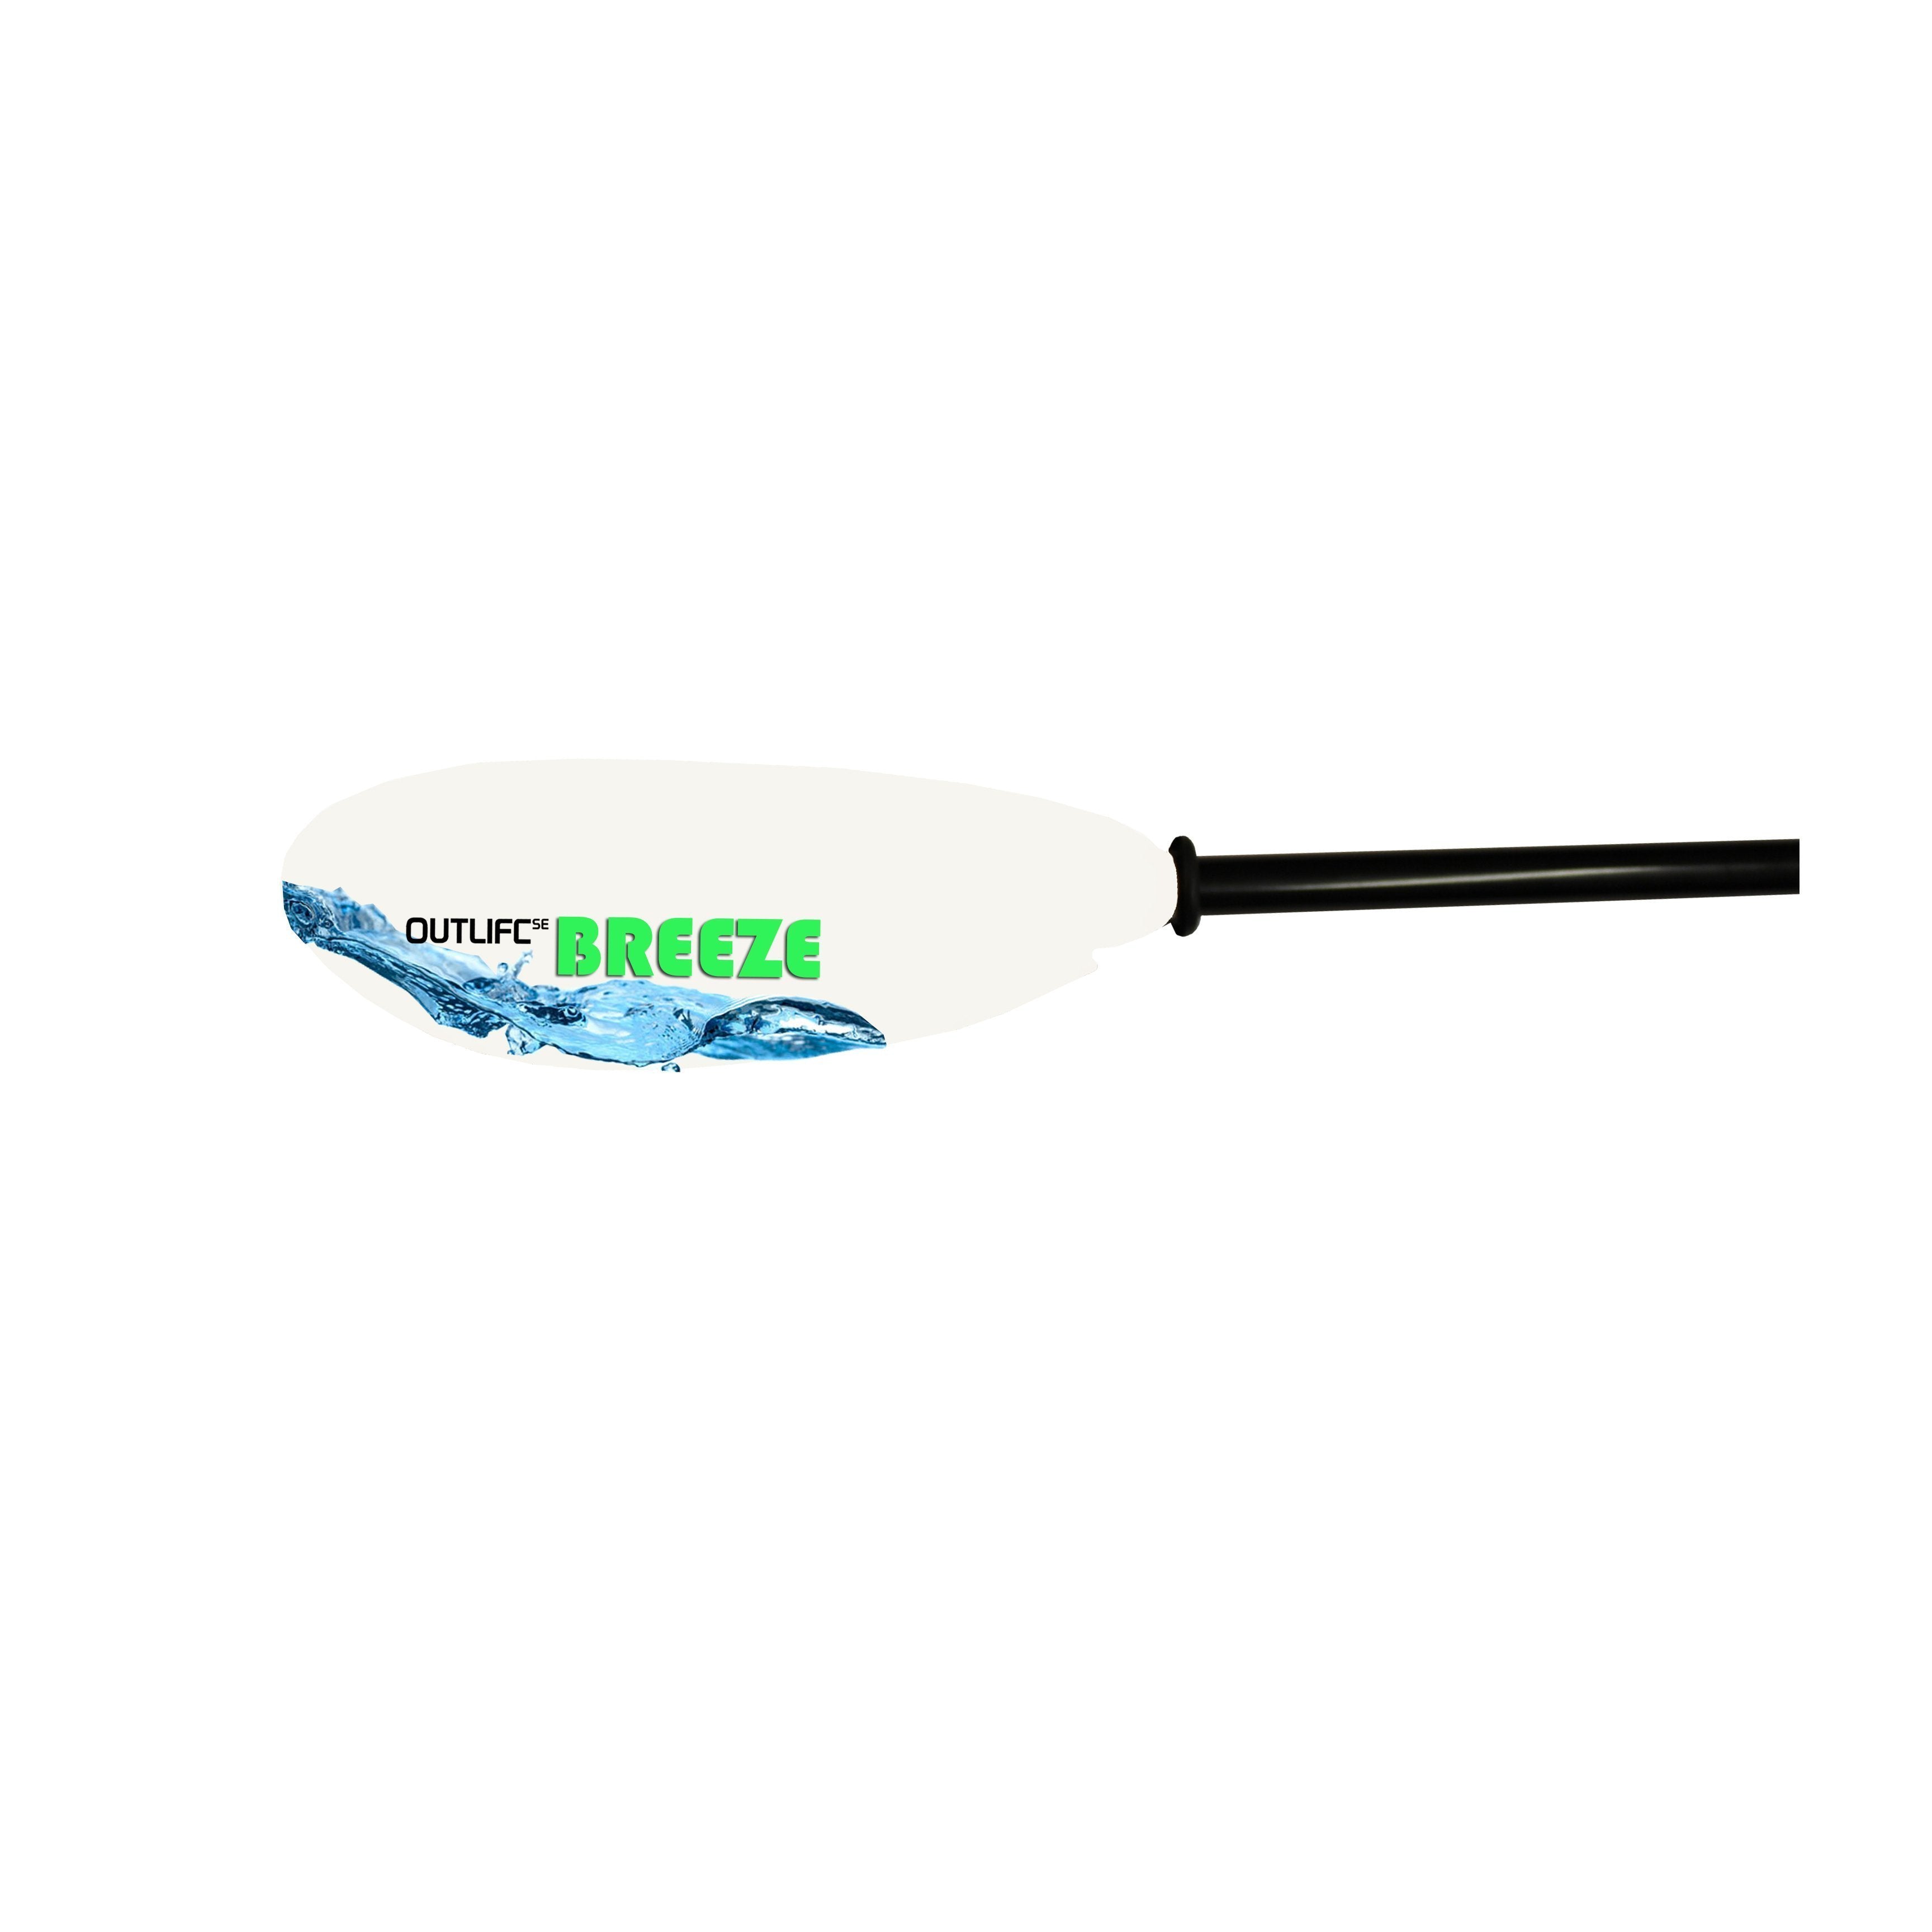 Outlife Breeze Touring Paddle, 4-piece